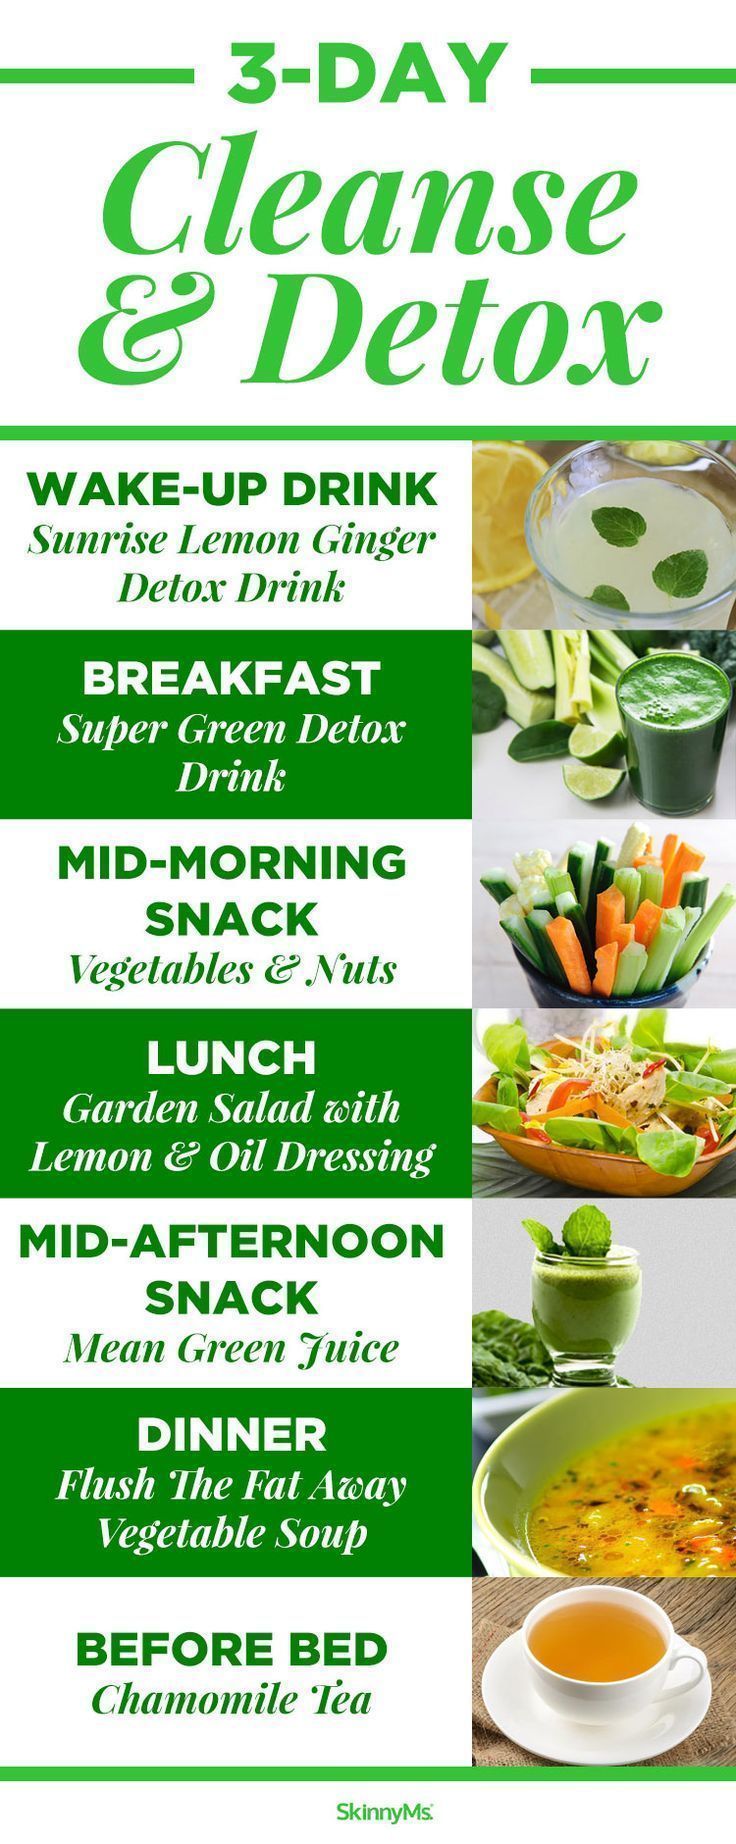 Three Day Cleanse & Detox -   21 smoothie cleanse diet
 ideas